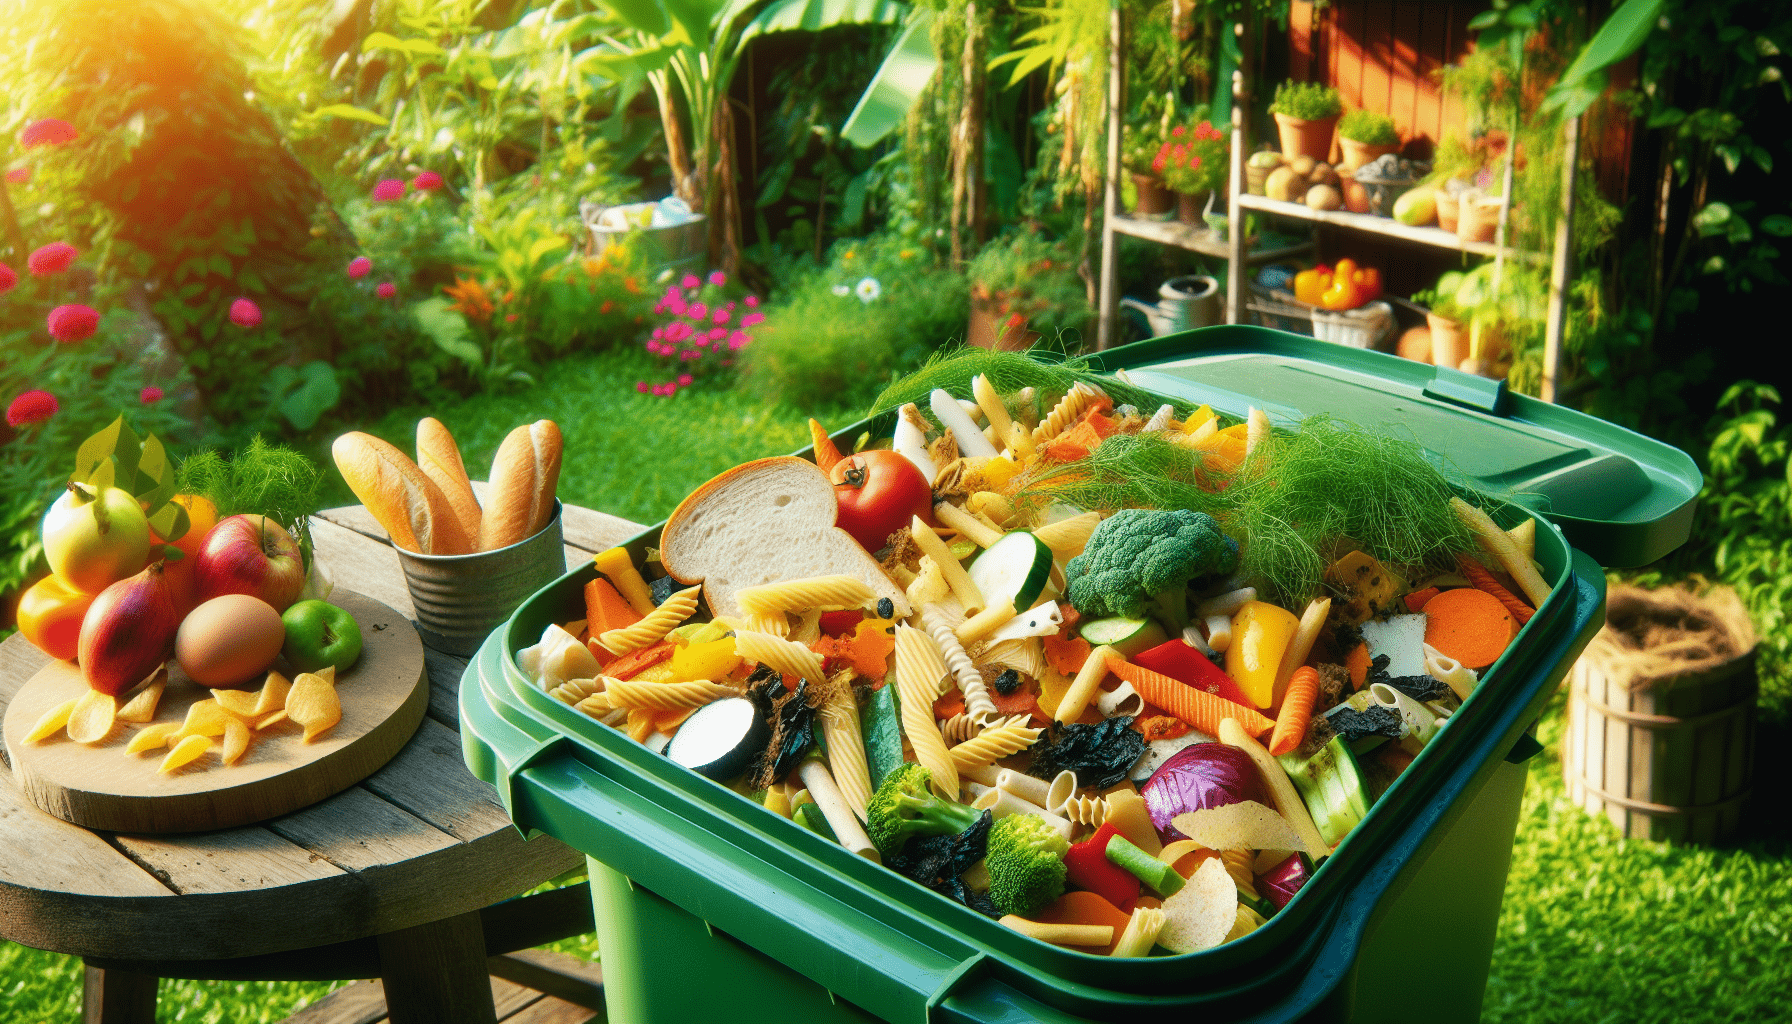 can i compost cooked food